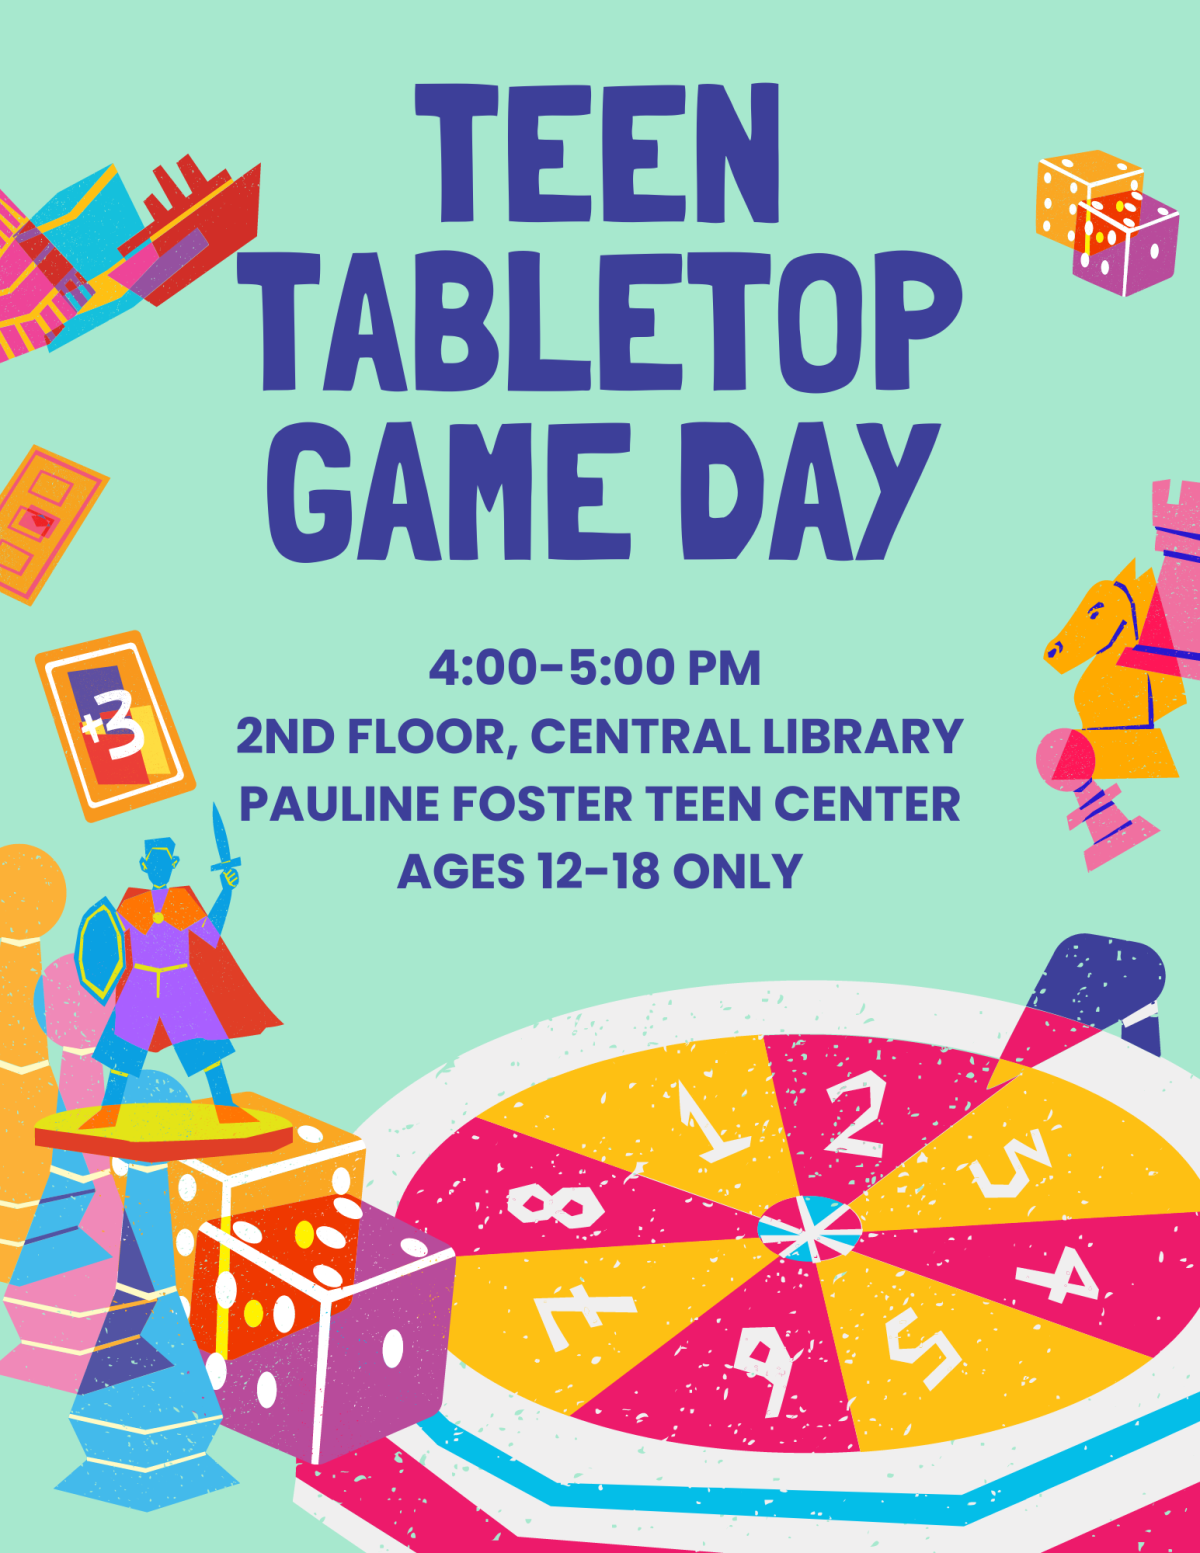 Teen Tabletop Game Day flyer.